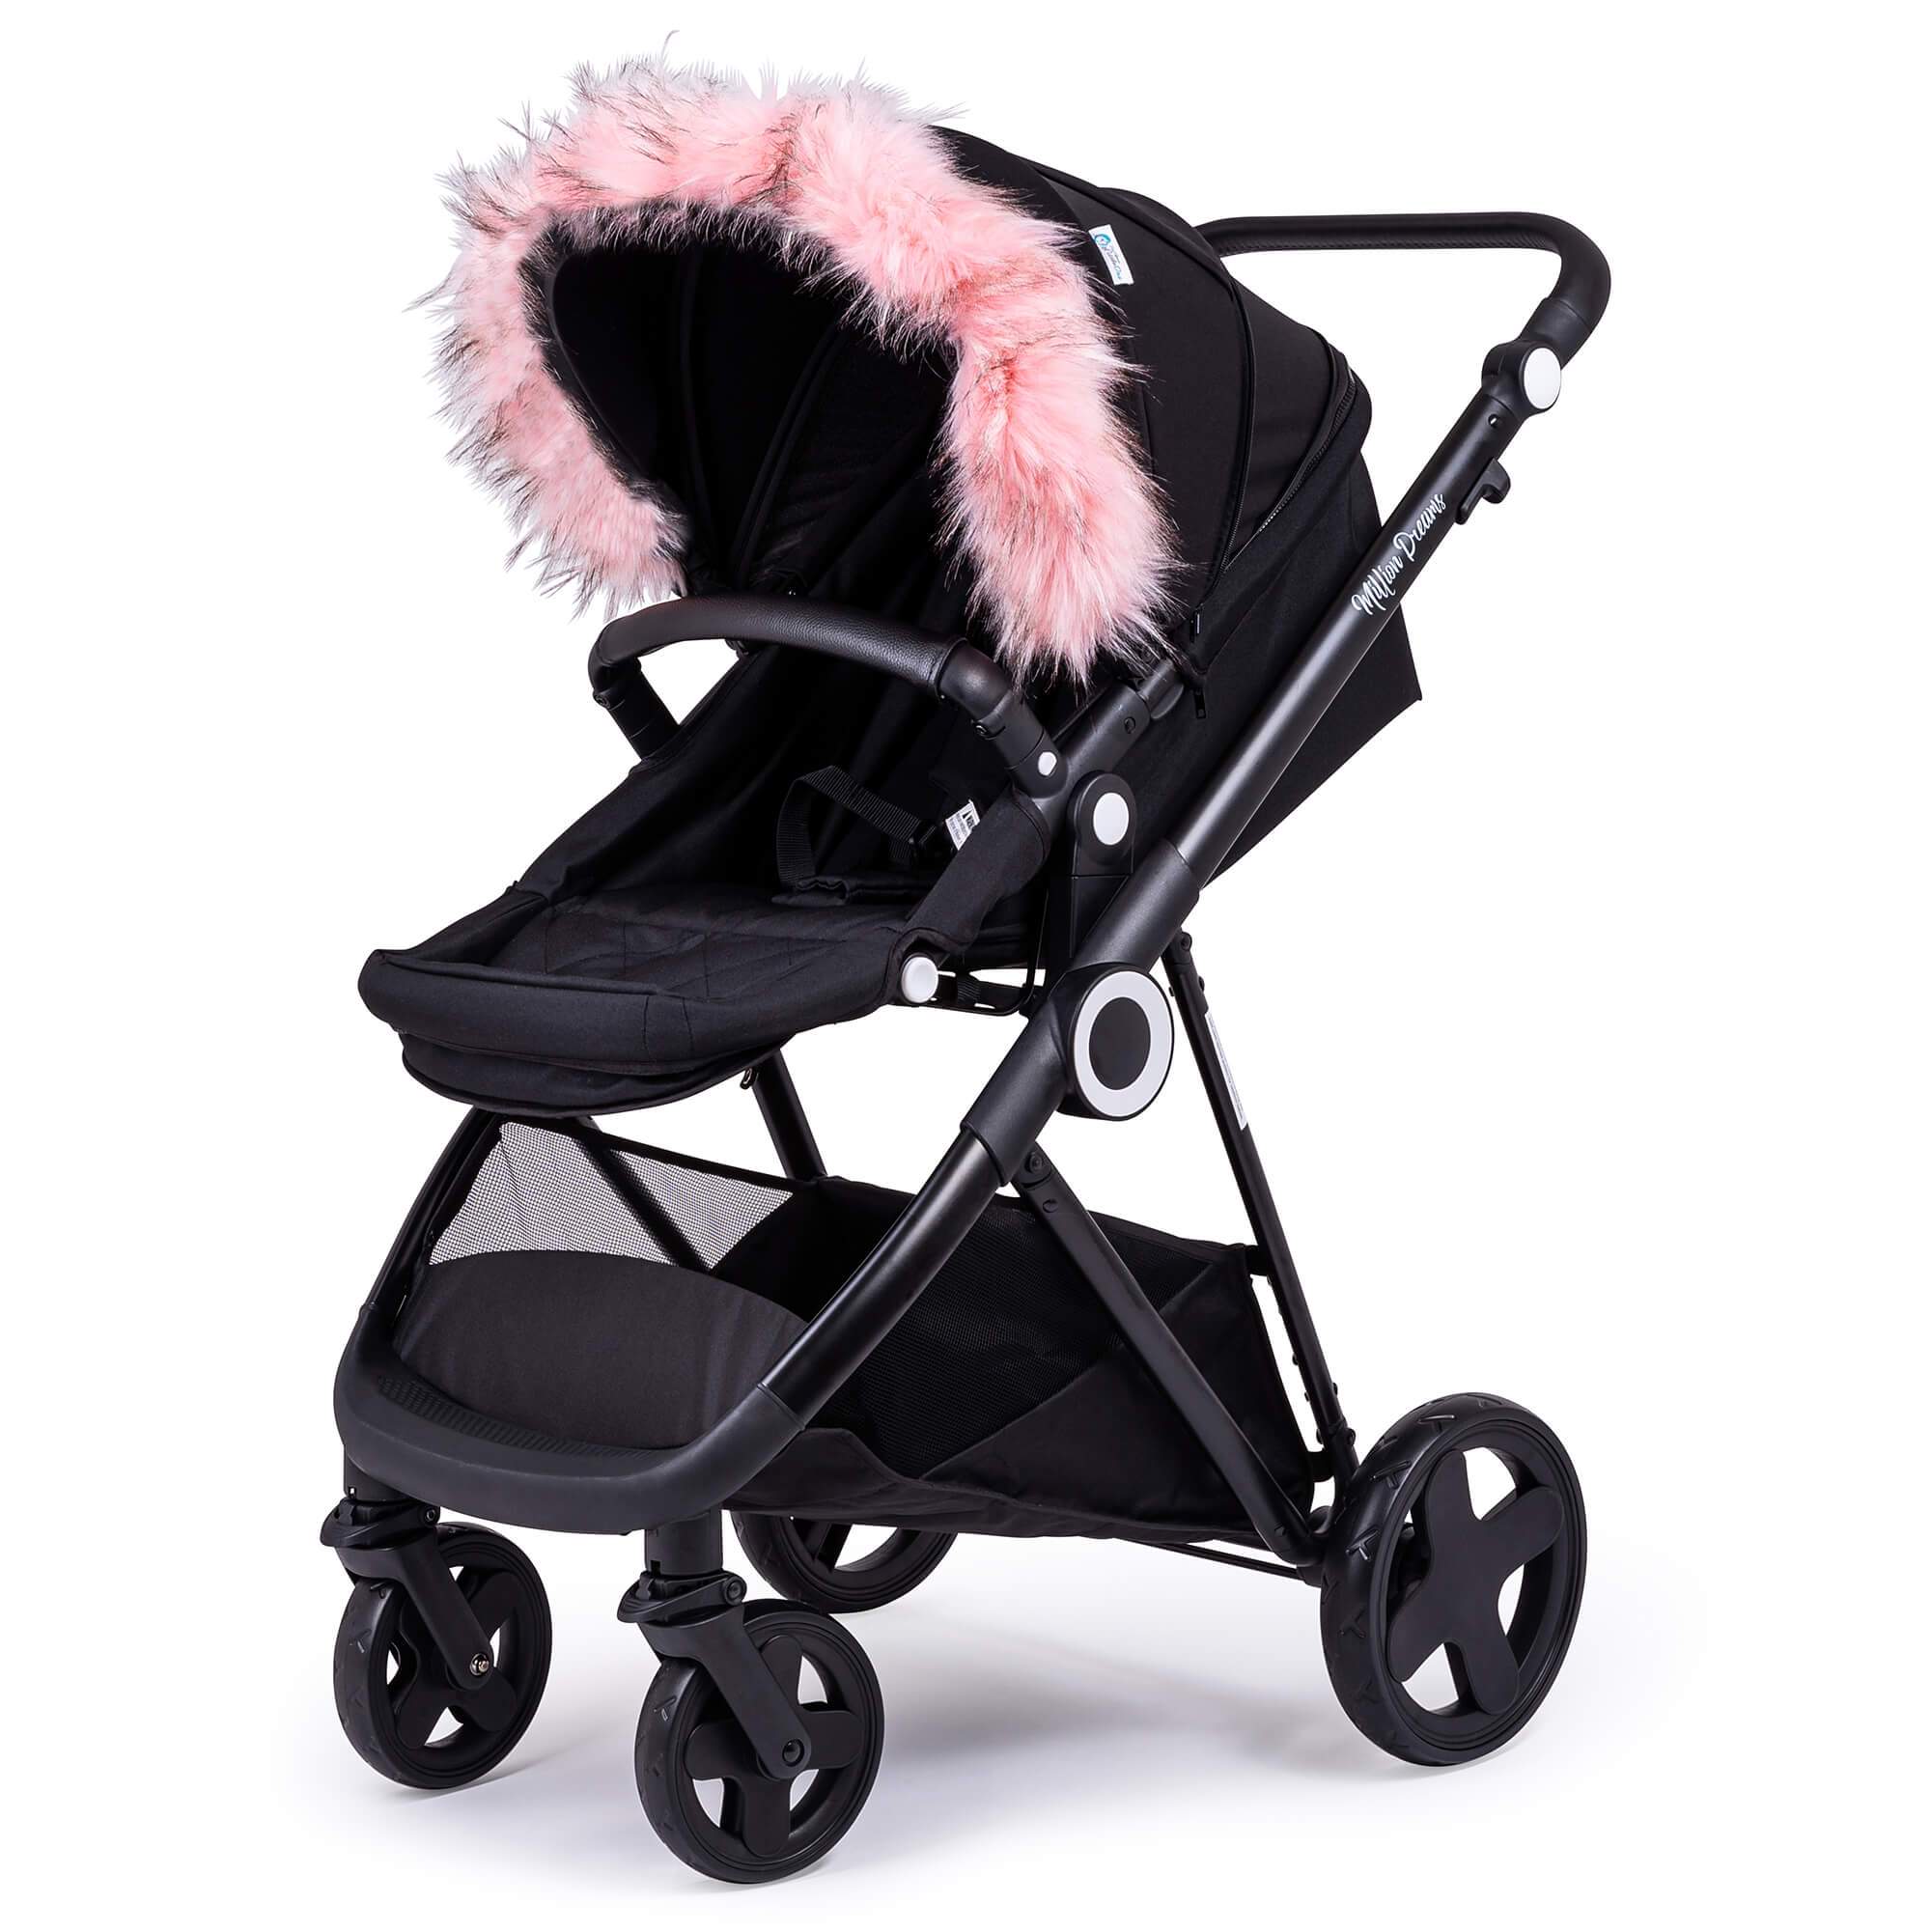 Pram Fur Hood Trim Attachment For Pushchair Compatible with Kiddy - For Your Little One